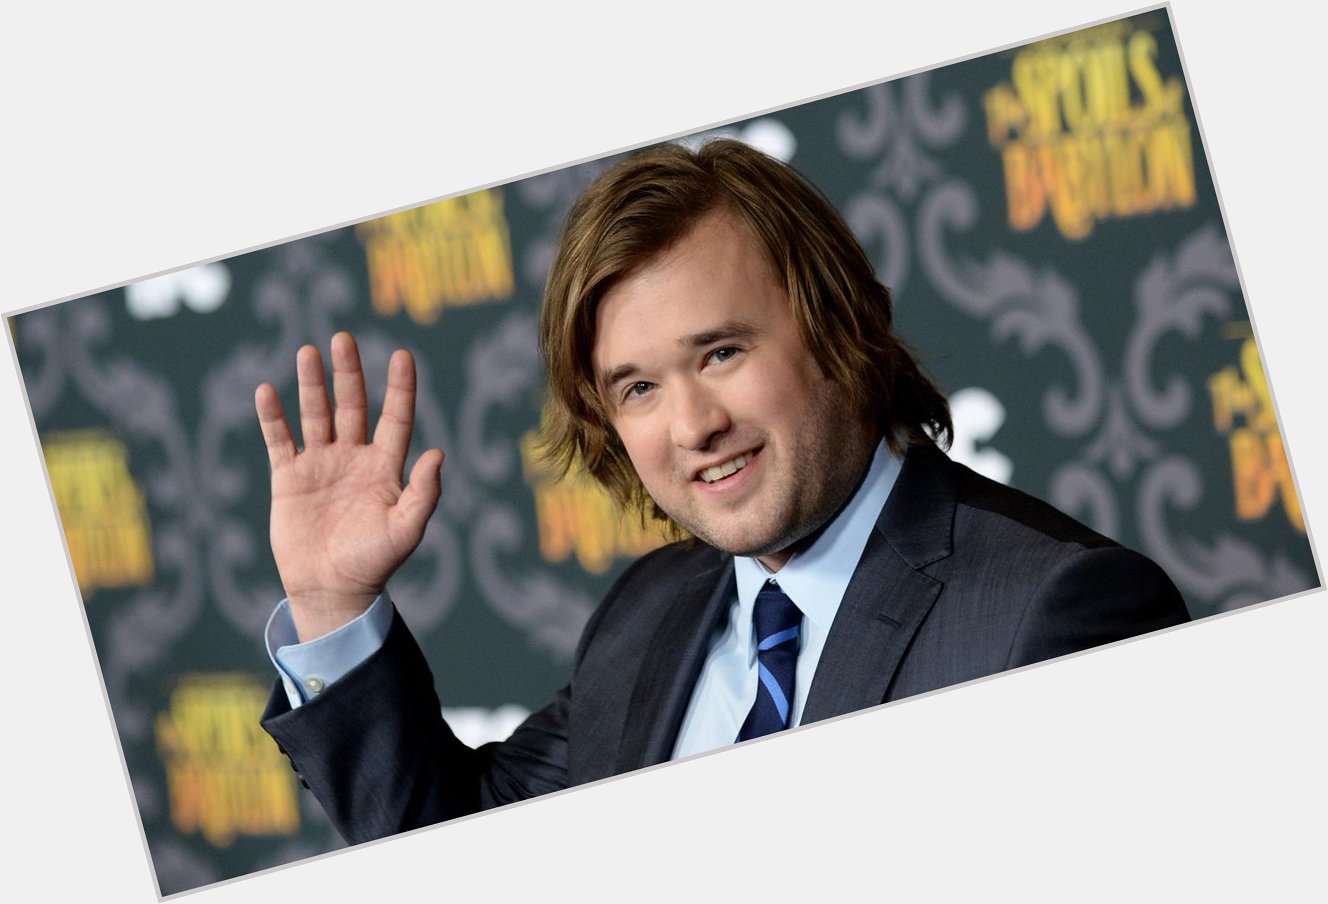 A happy 29th birthday to Haley Joel Osment, the young actor made famous by the likes of The Sixth Sense and A.I. 